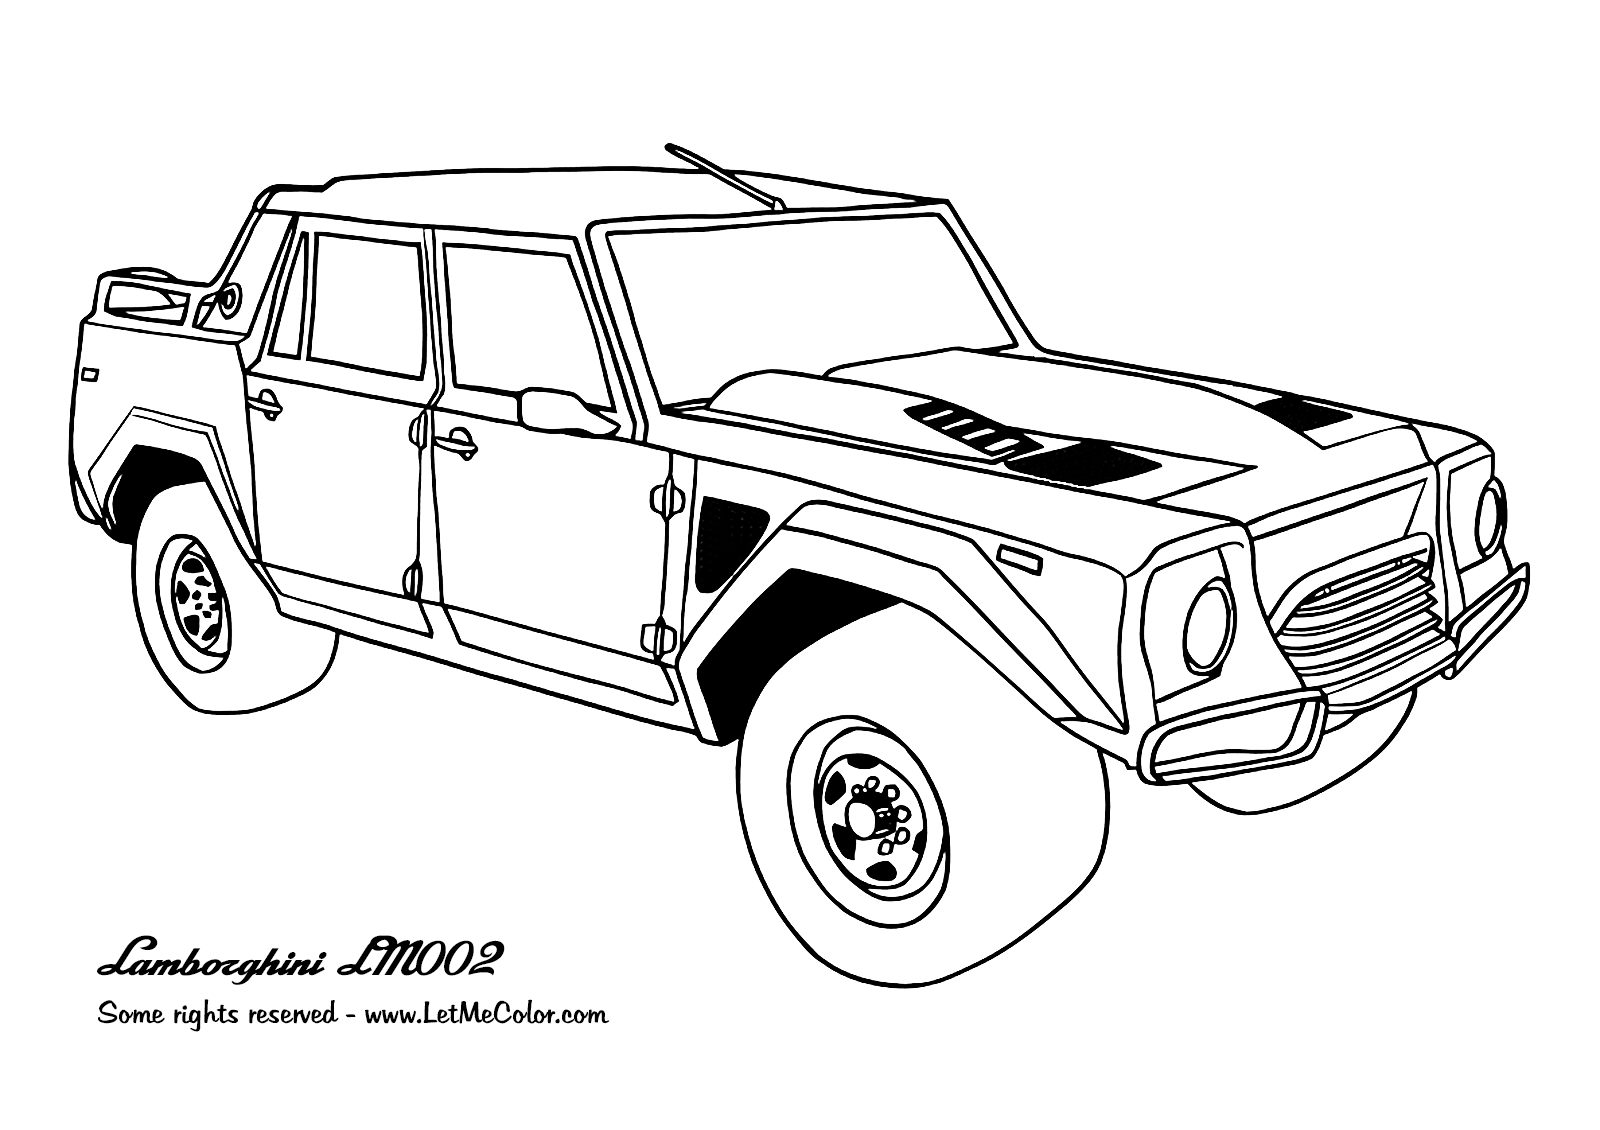 real car coloring pages real cars coloring pages download and print for free car real coloring pages 